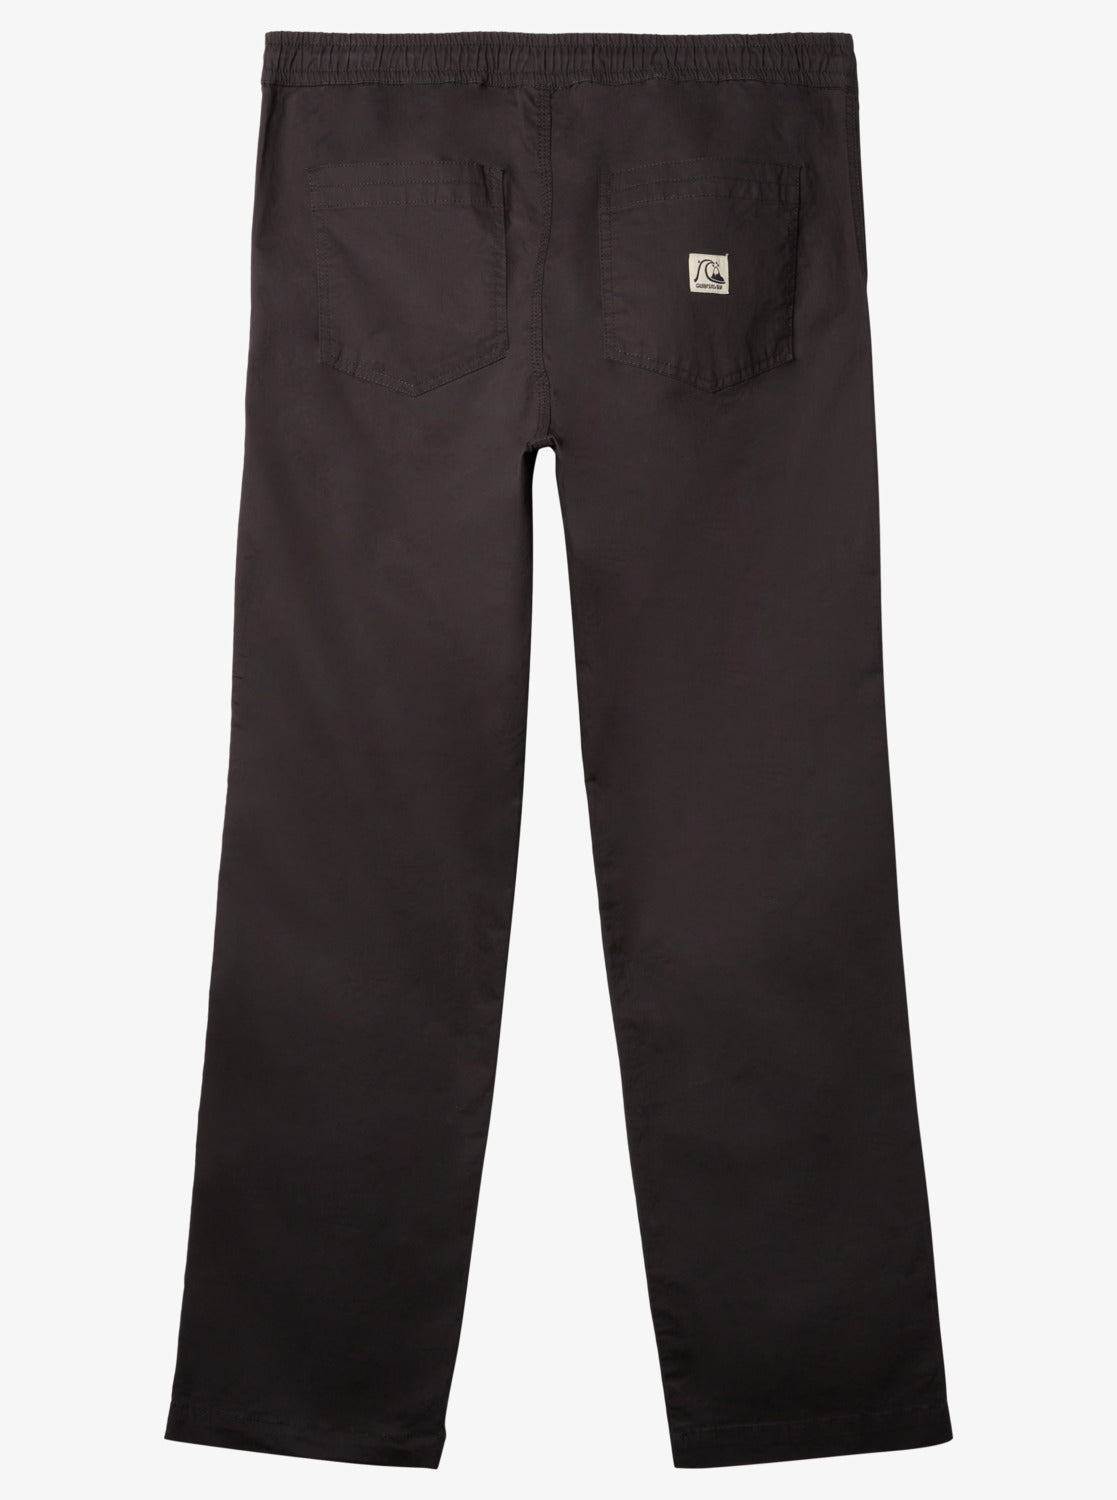 Quiksilver DNA Beach Pants in tarmac colourway from back